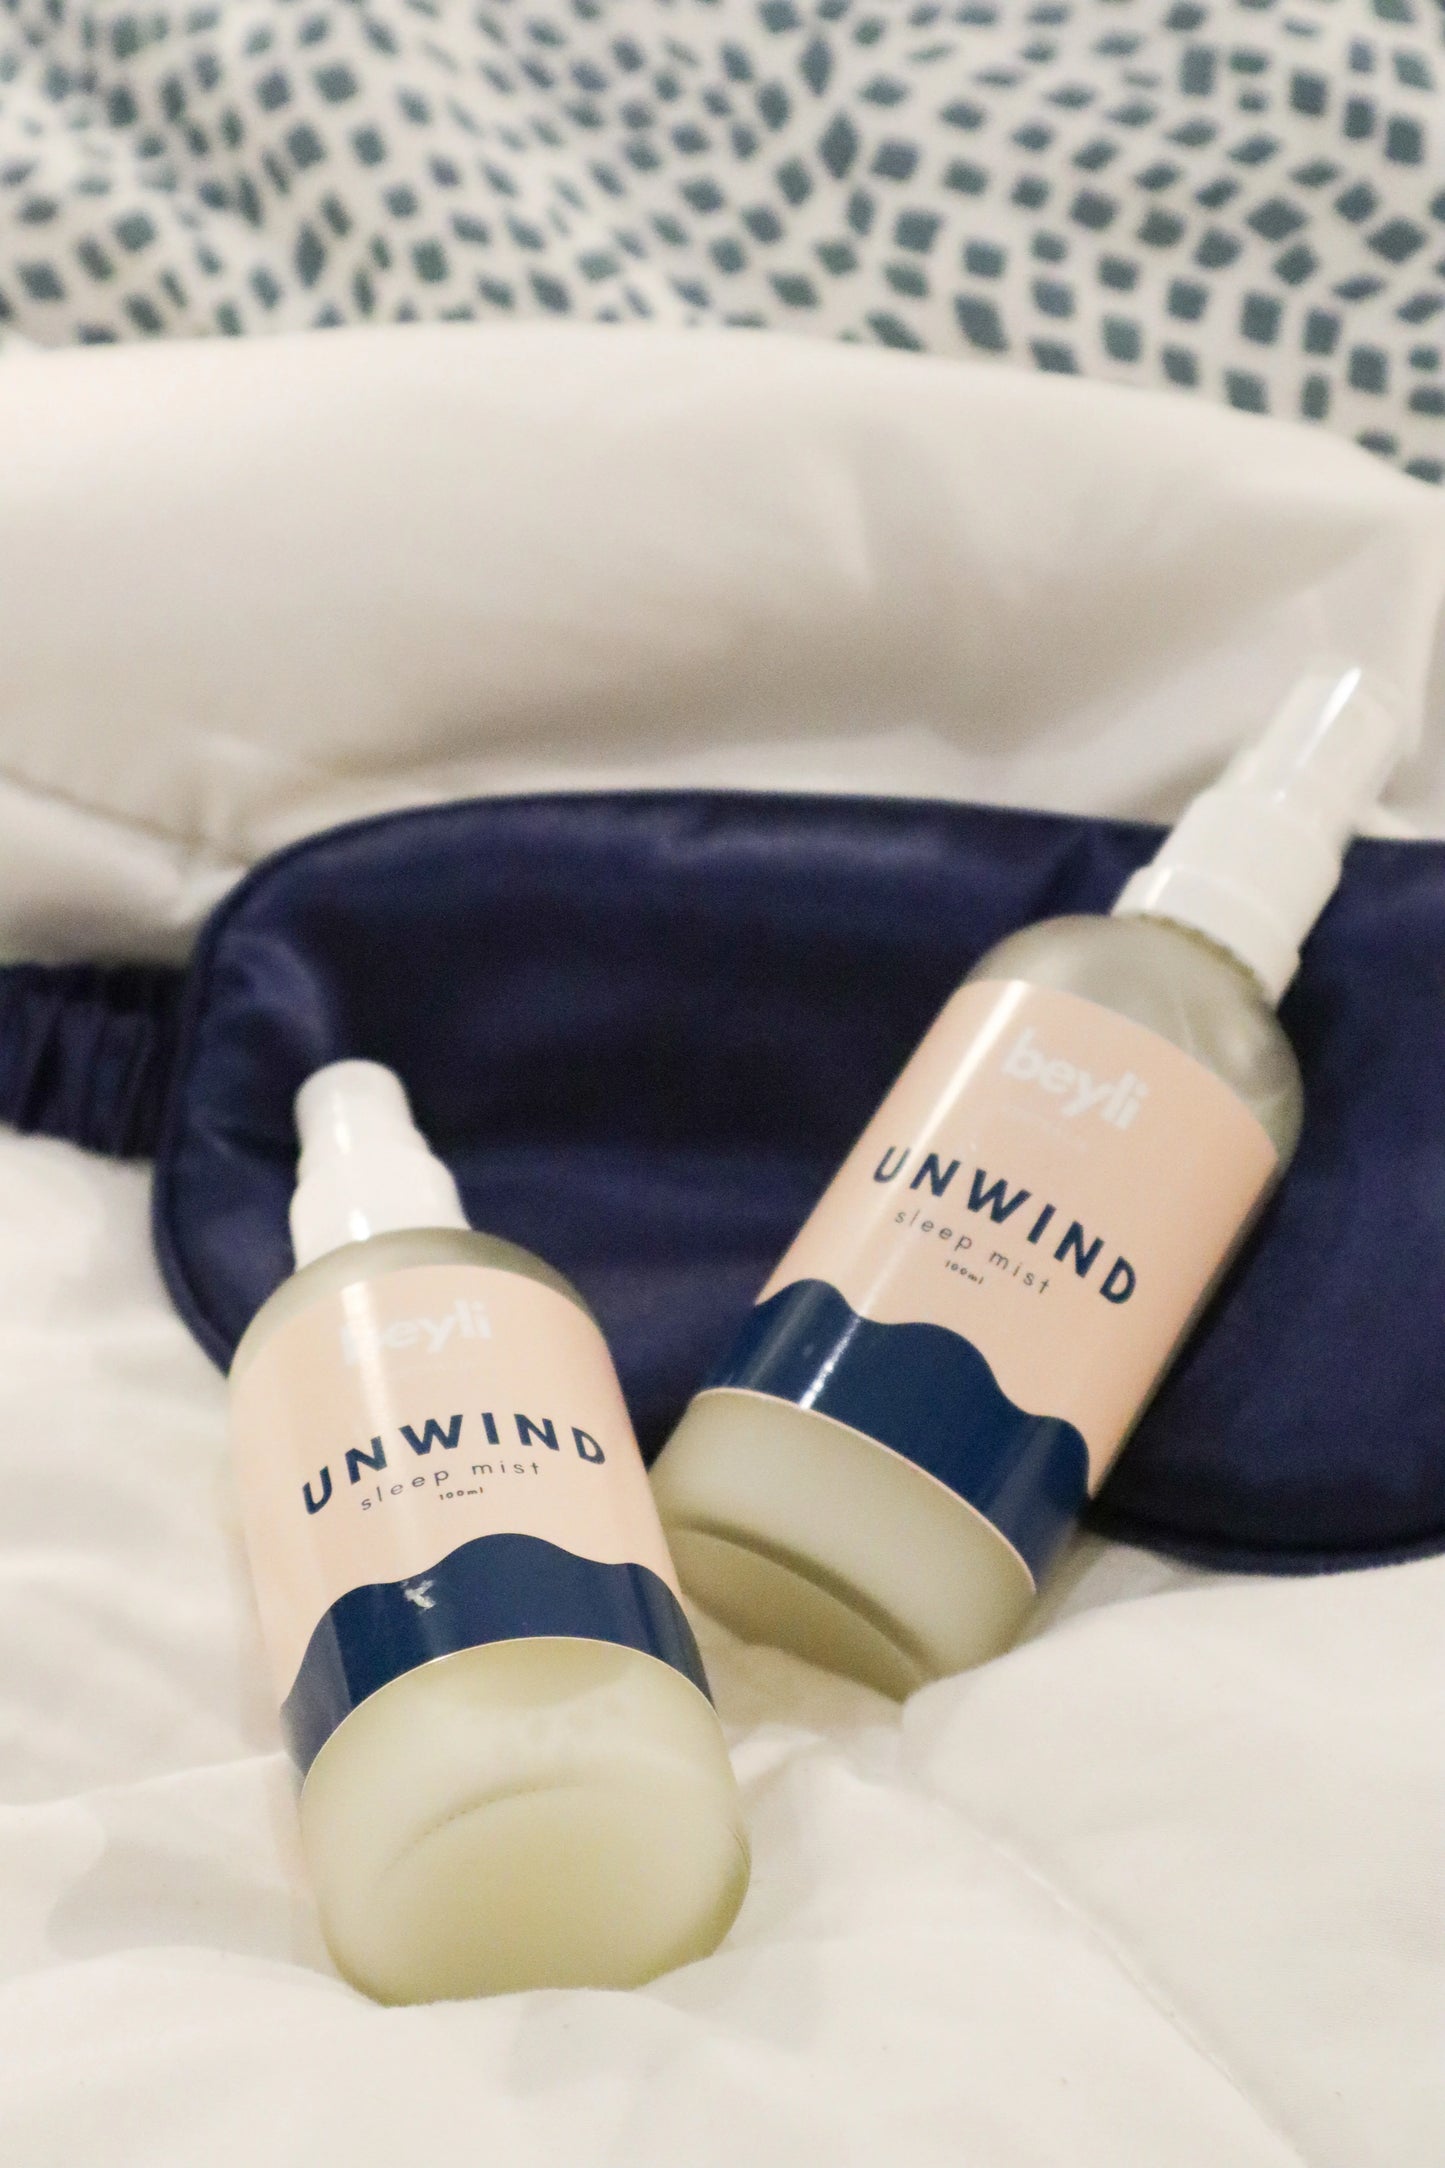 Pair of Sleep Bundle Essentials unwind lotions on a comfortable bed